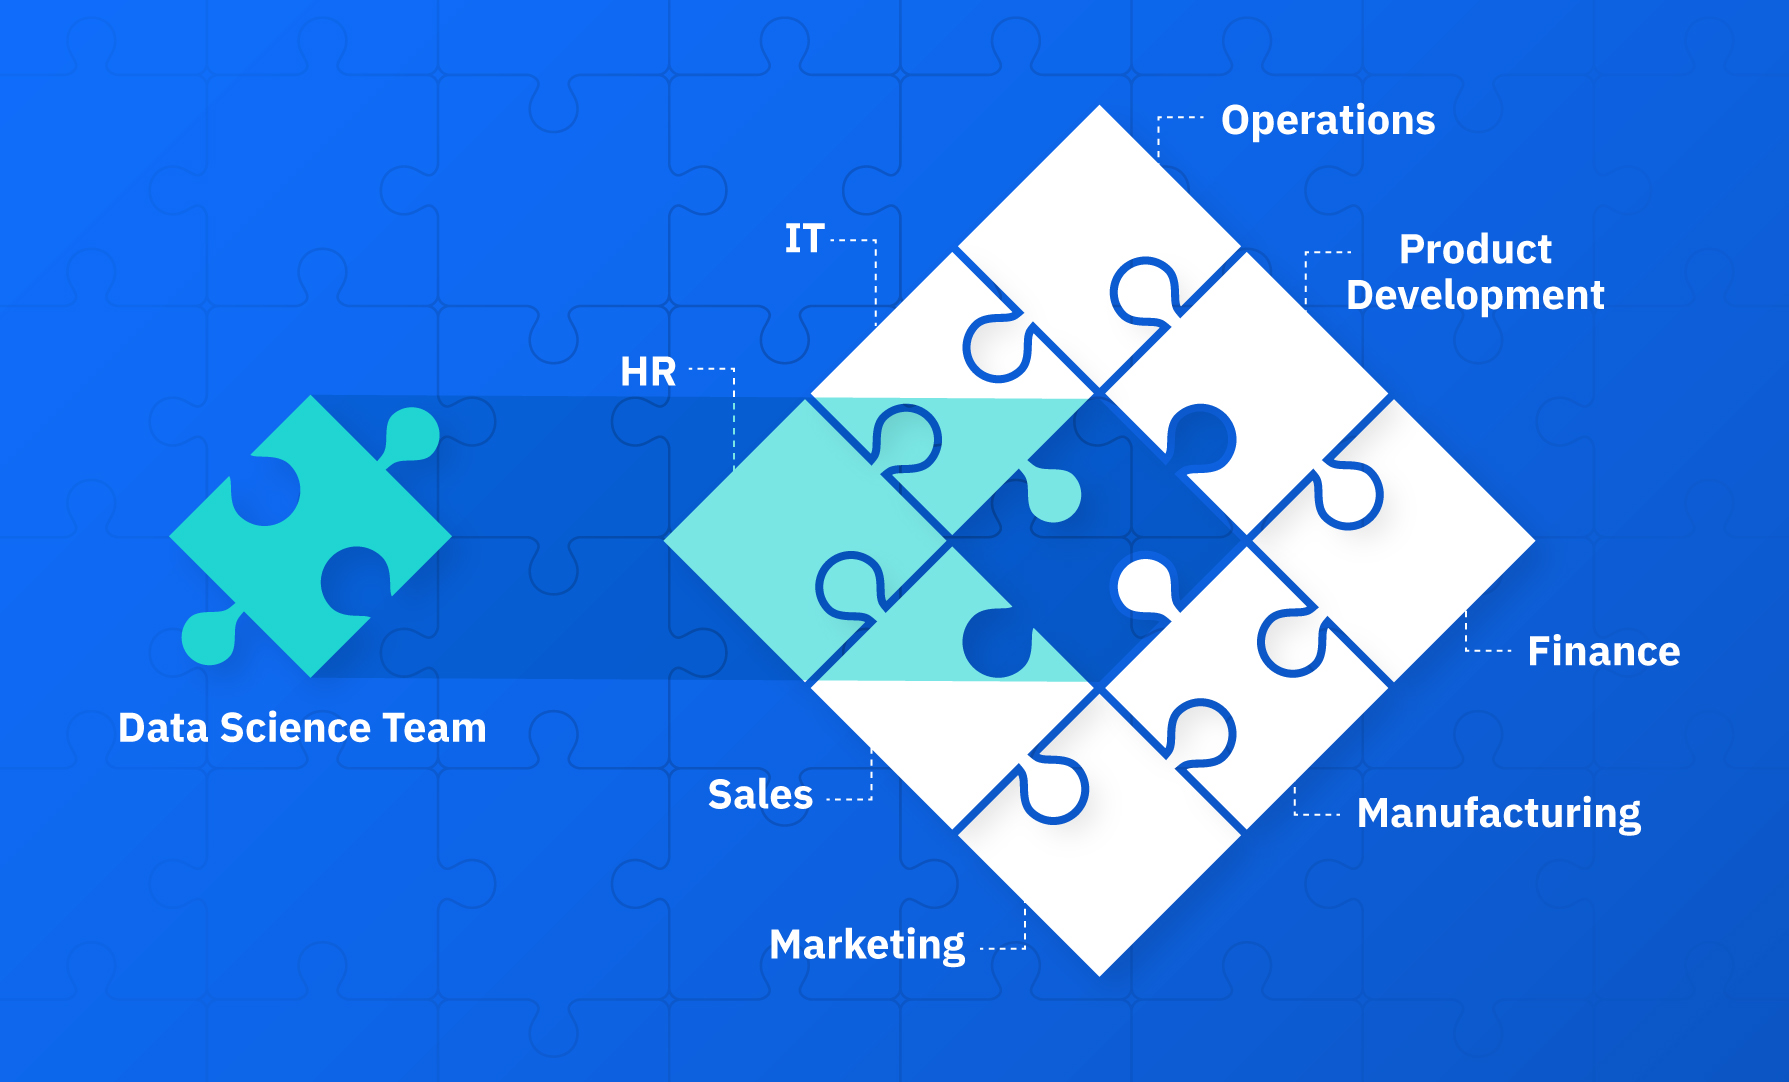 Graphic that shows the many function of a business like IT, HR, Operations, Product Development, and finance as puzzle pieces with an opening in the center of the puzzle. Data Science Team is represented as the missing puzzle piece that completes the whole puzzle of business operations.